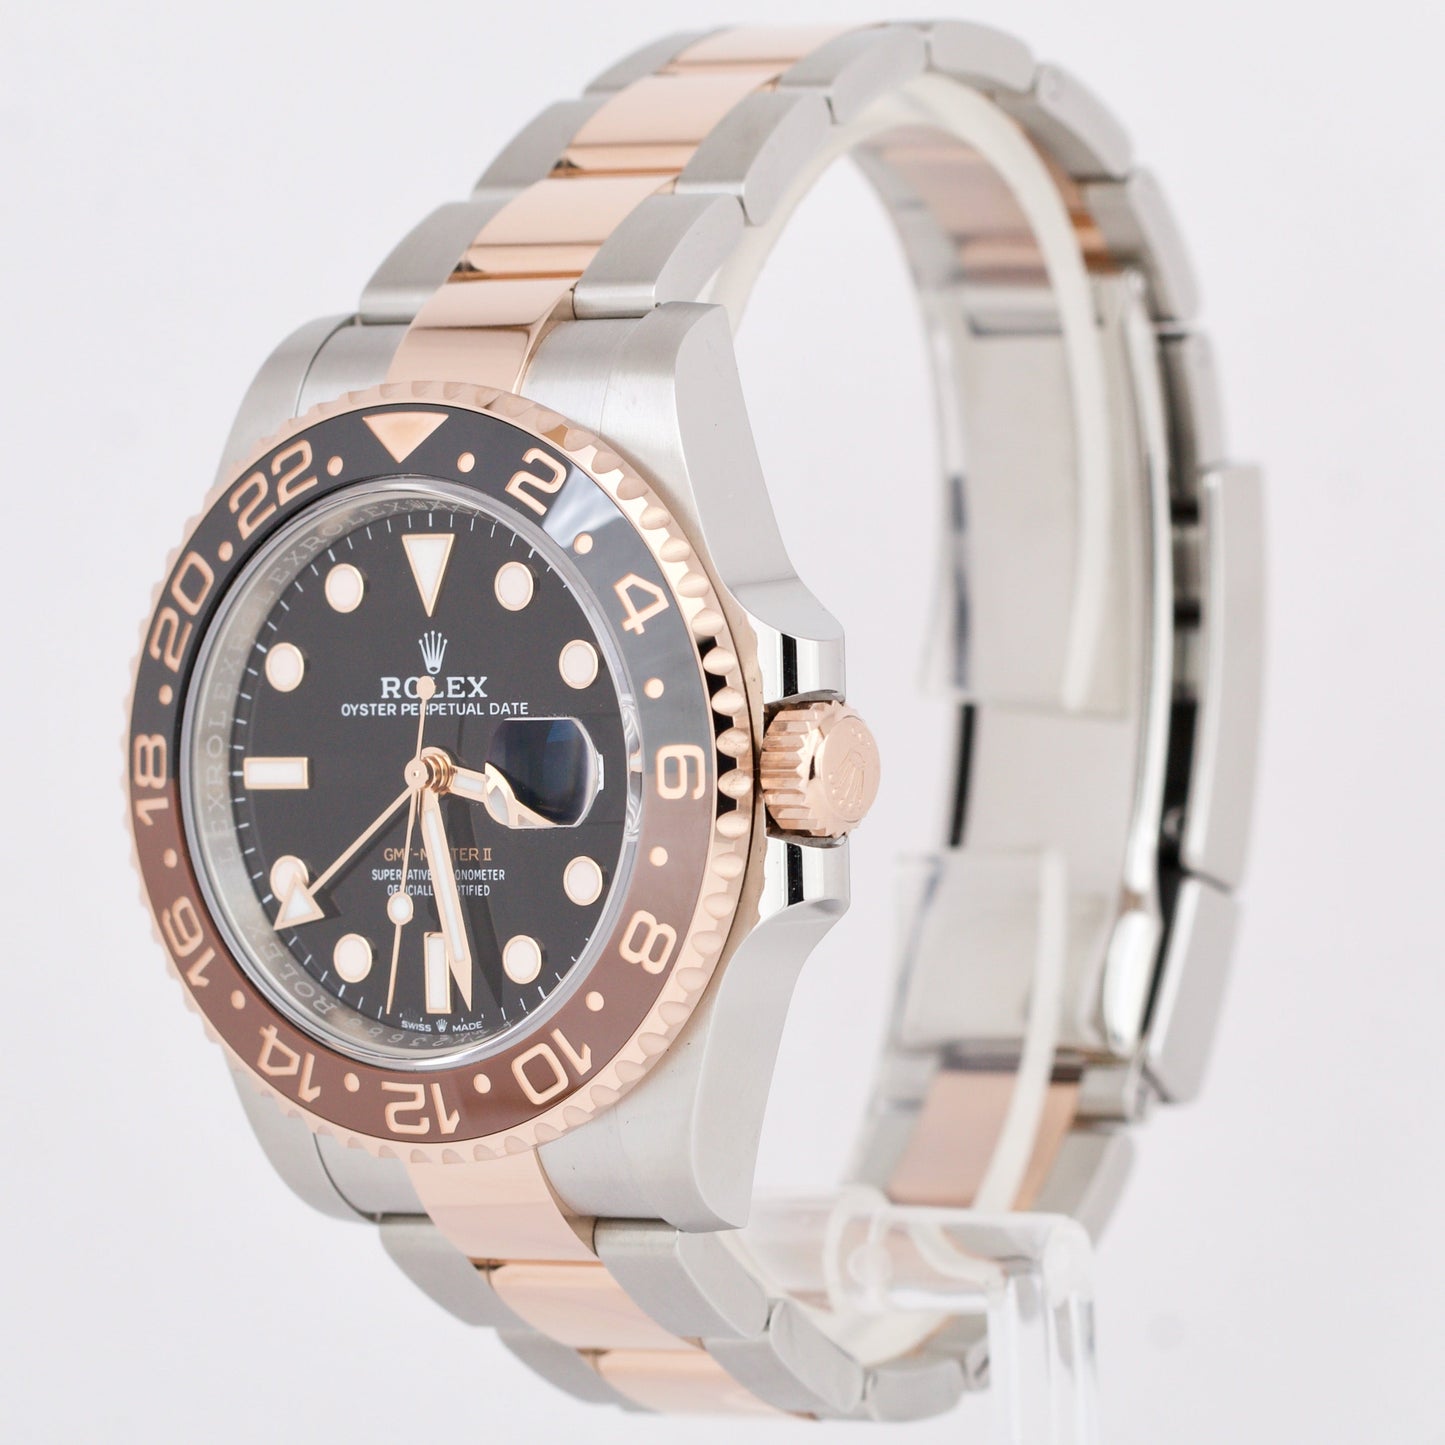 MINT 2021 PAPERS Rolex GMT-Master II Two-Tone ROOT BEER 18K Gold 40mm 126711 B+P